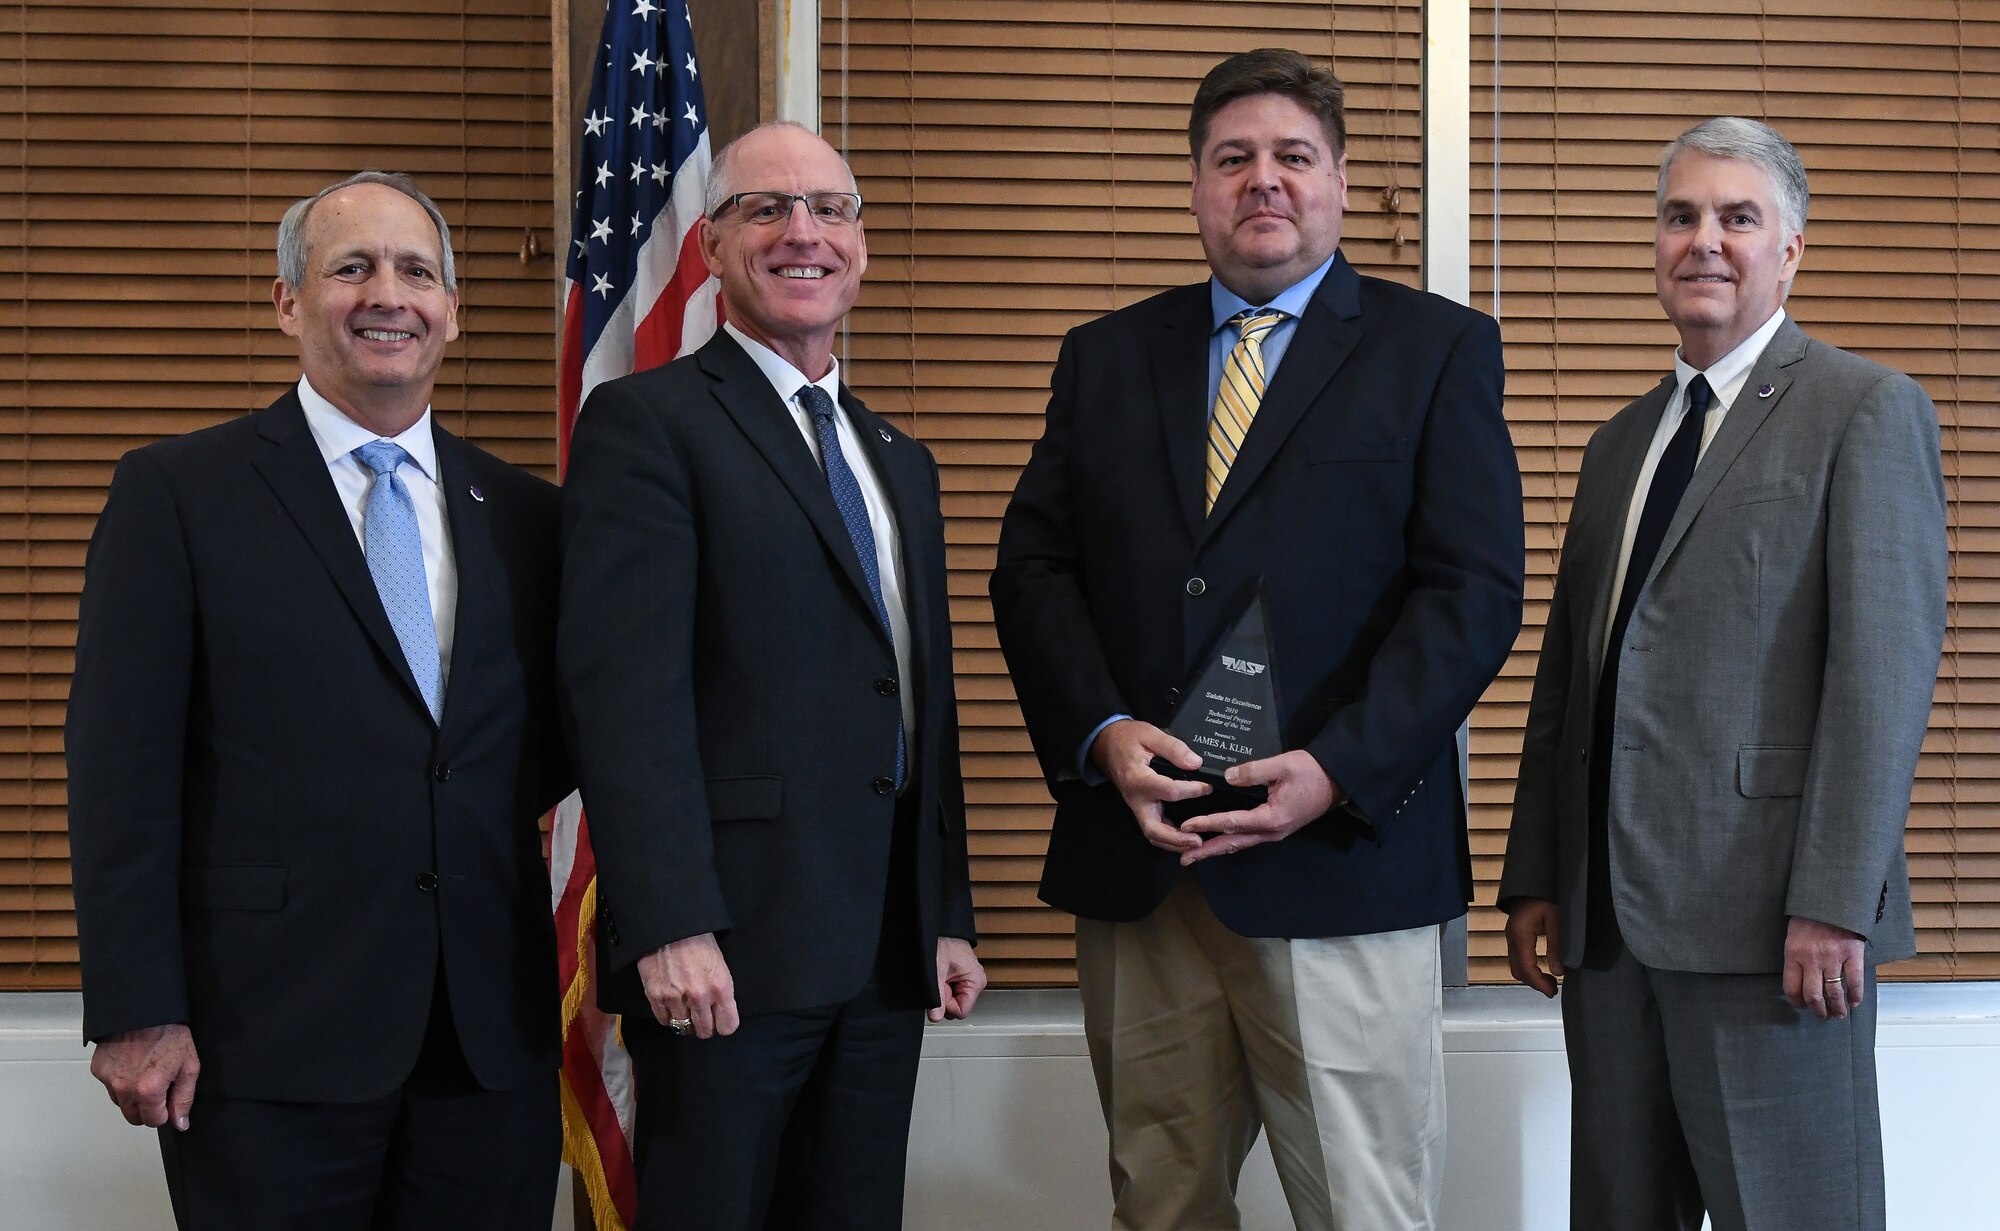 Capital Project Manager James Klem, third from left, receives the Technical Project Leader of the Year award during the National Aerospace Solutions (NAS), LLC, Salute to Excellence Annual Awards Banquet, Nov. 5, 2019, at the Arnold Lakeside Center, Arnold Air Force Base, Tenn. Also pictured, from left, is NAS Deputy General Manager Michael Belzil, NAS General Manager Dr. Richard Tighe and NAS Mission Execution Director Jeff Henderson. (U.S. Air Force photo by Jill Pickett)